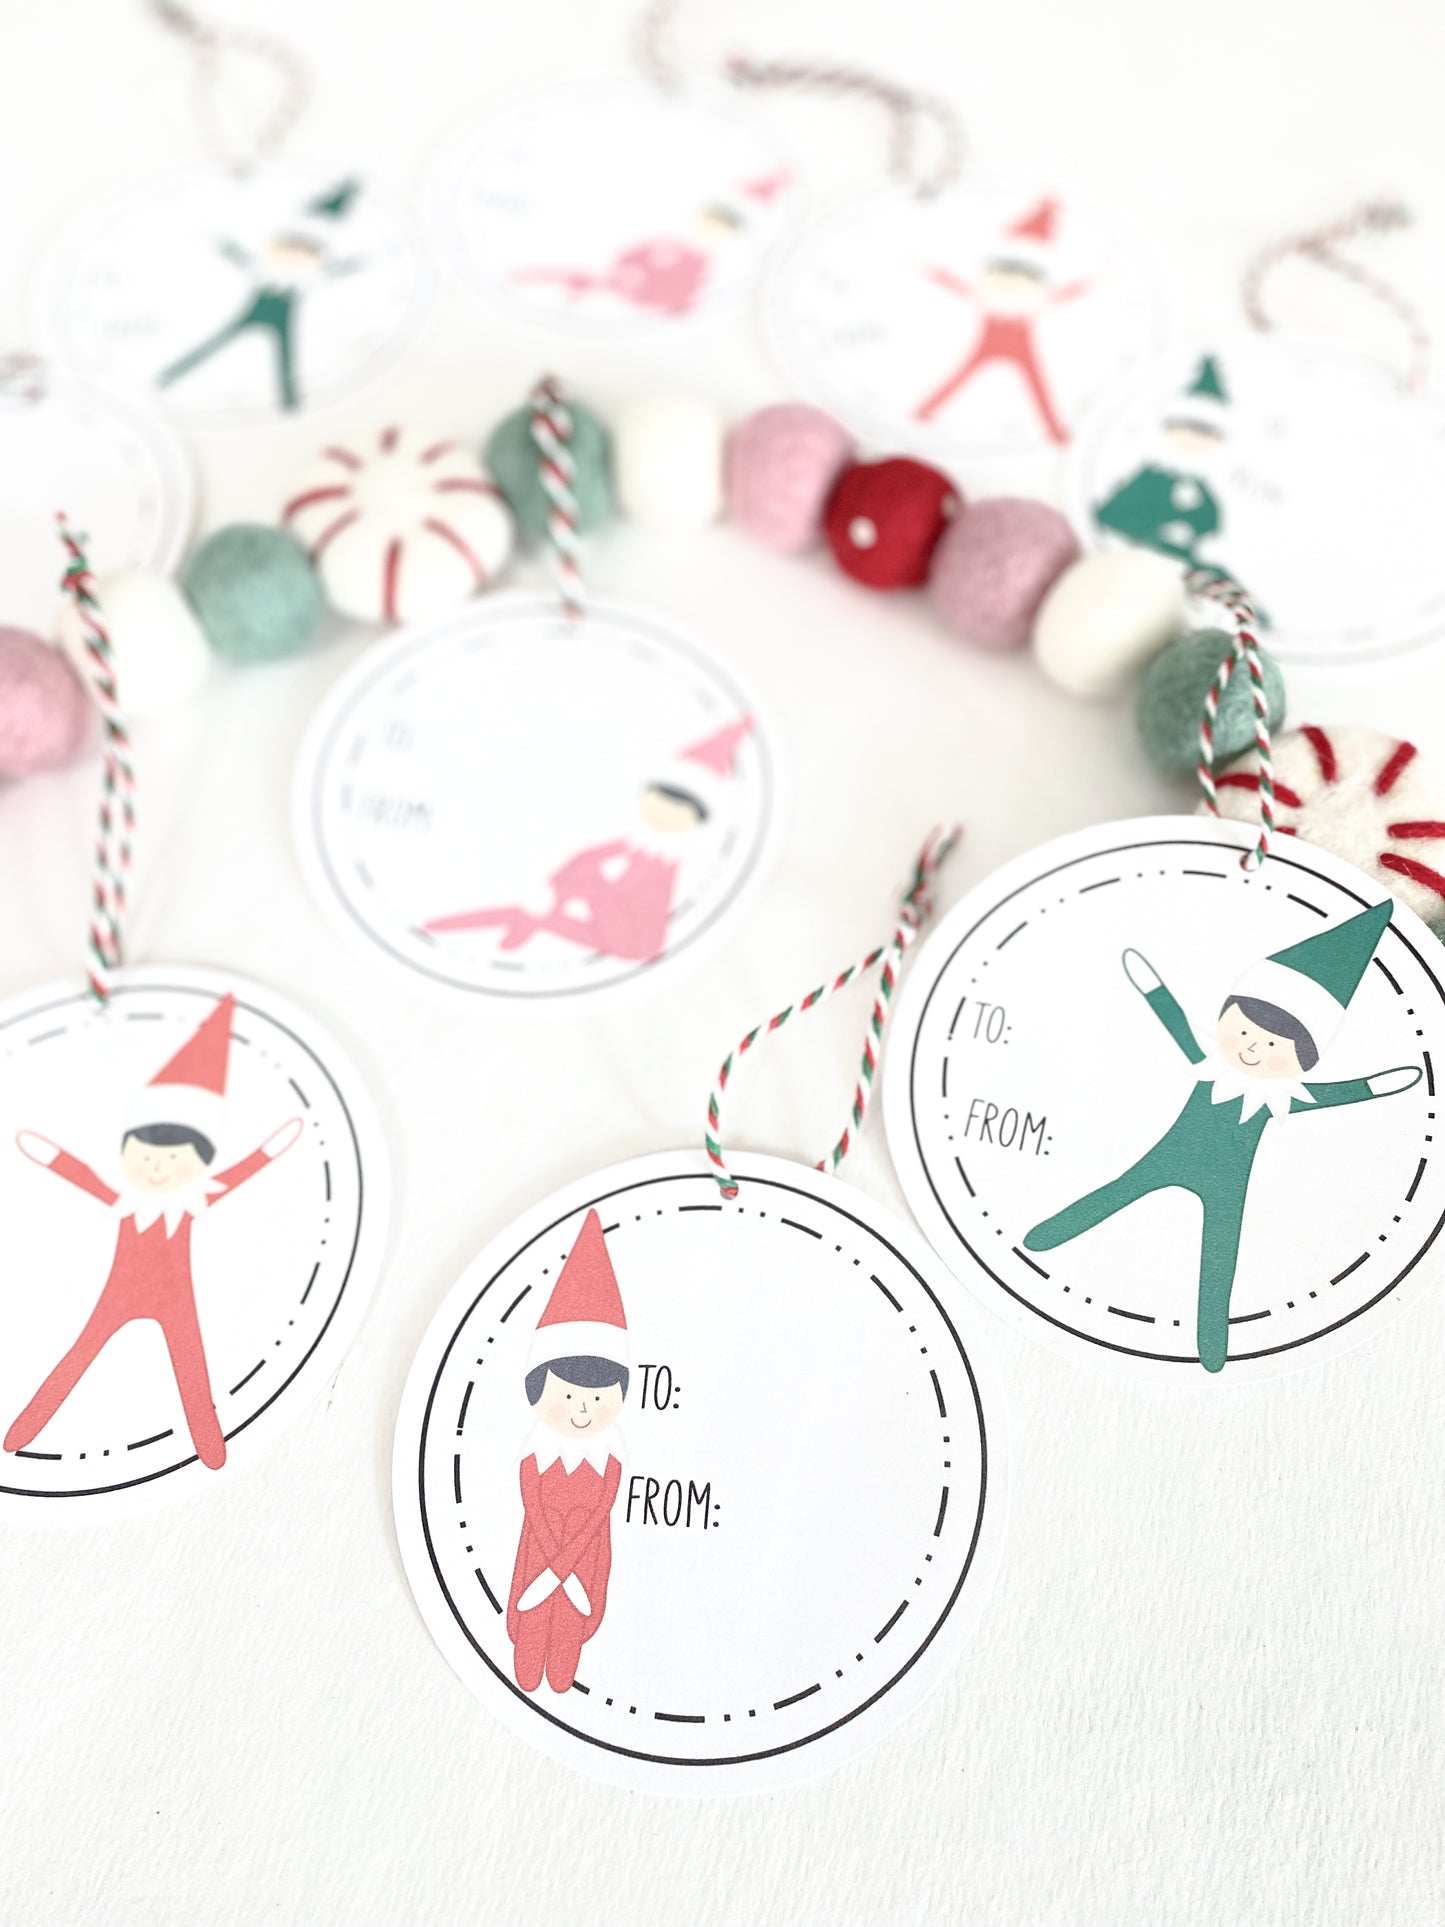 ELF ON THE GIFT TAGS